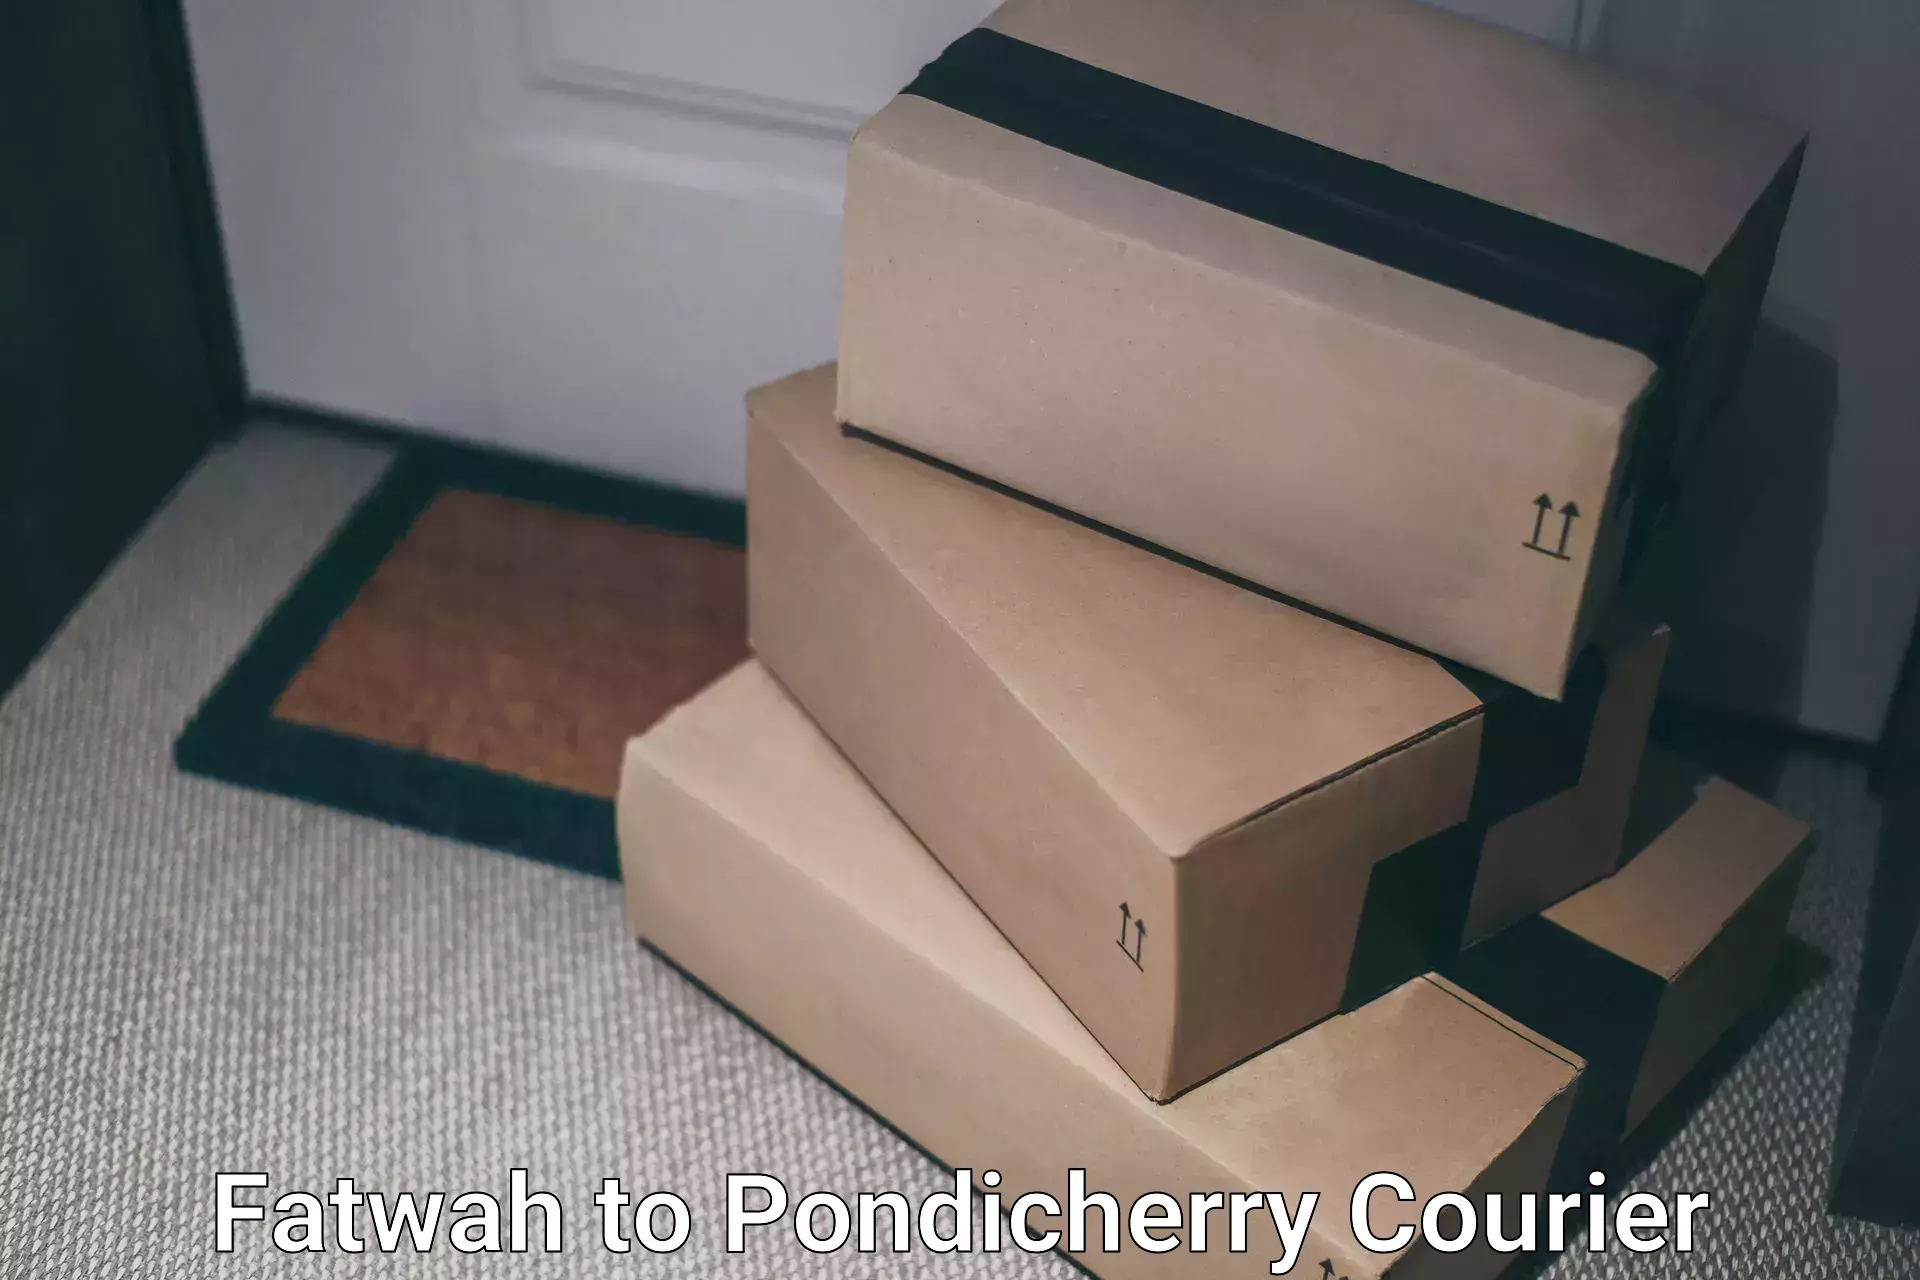 Speedy delivery service in Fatwah to Pondicherry